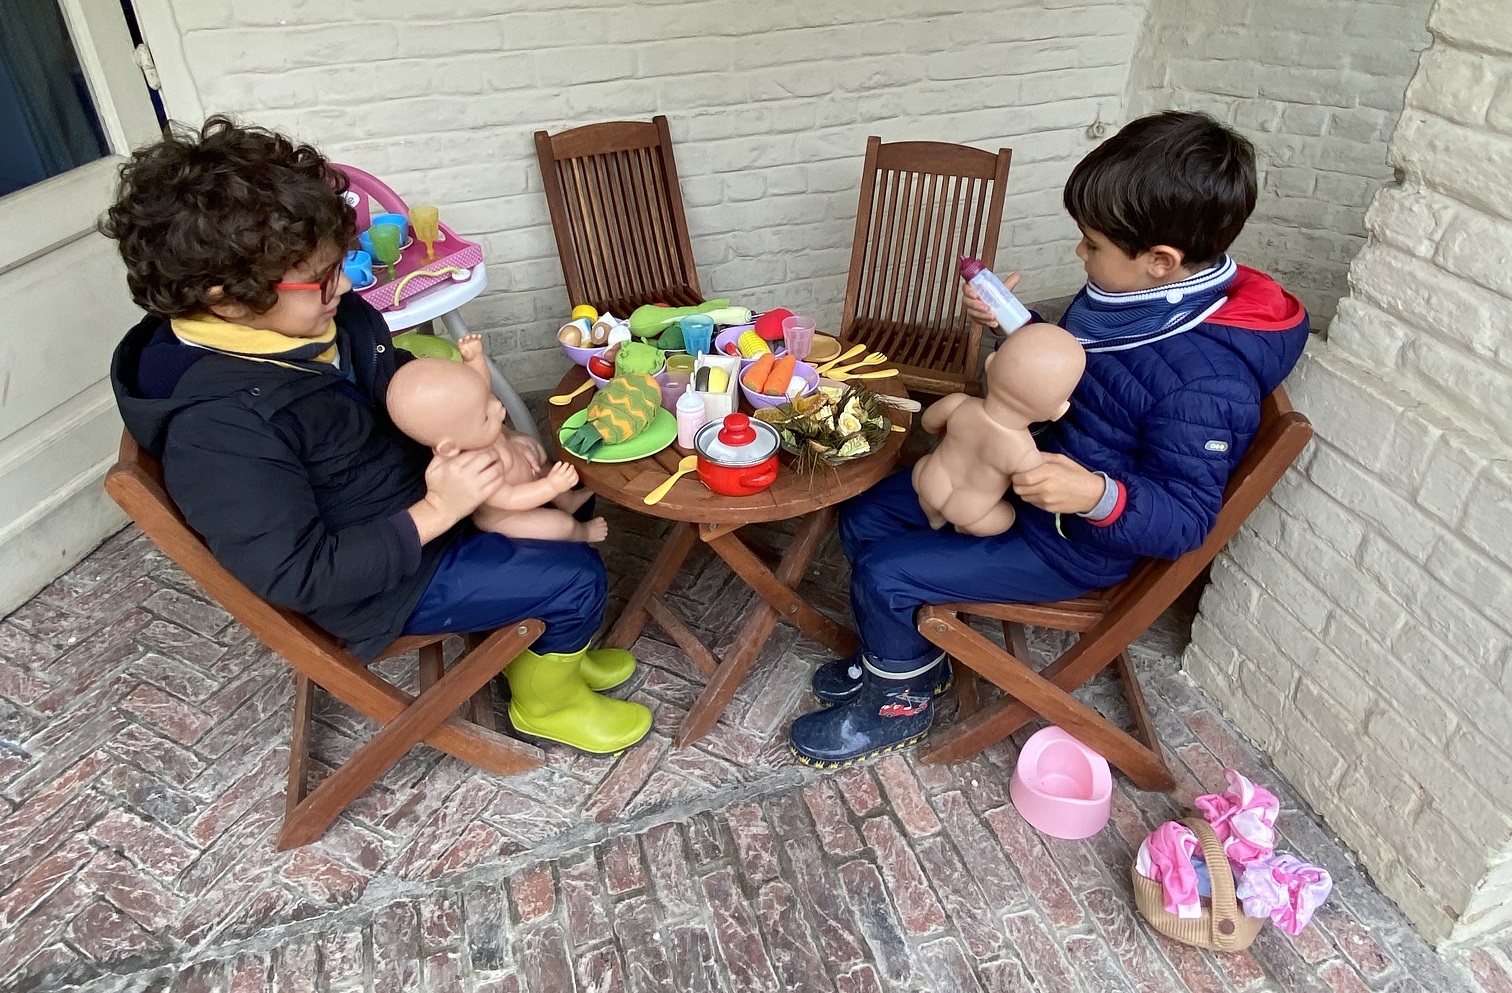 Two young boys playing with dolls at a table in the garden.